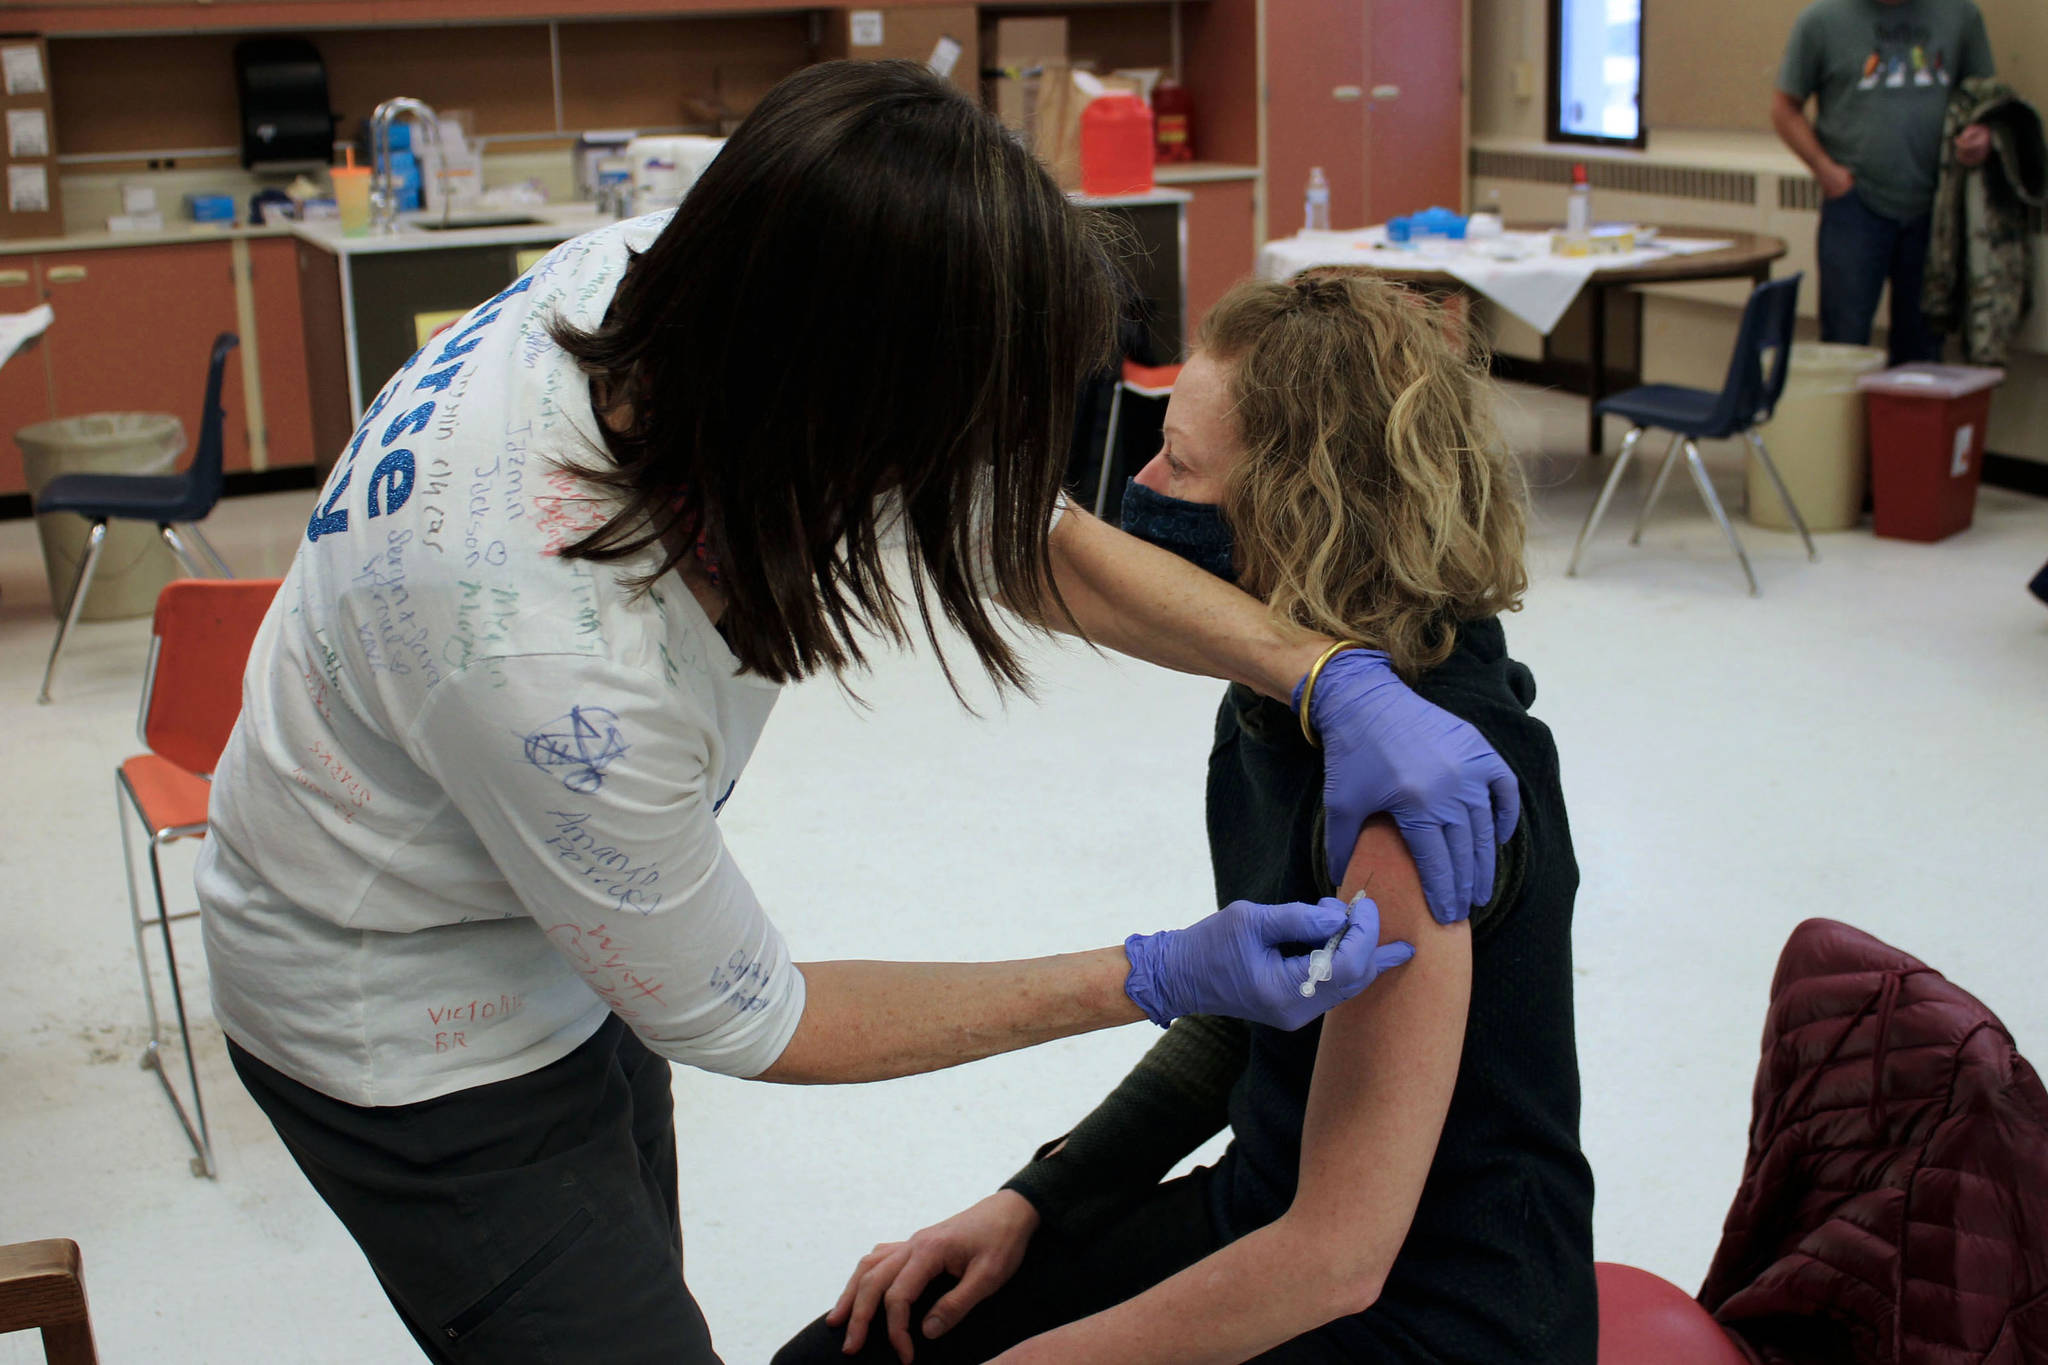 Tracy Silta (left) administers a dose of a COVID-19 vaccine to Melissa Linton during a vaccine clinic at Soldotna Prep School on Friday, Feb. 26, 2021, in Soldotna, Alaska. (Ashlyn O’Hara/Peninsula Clarion)